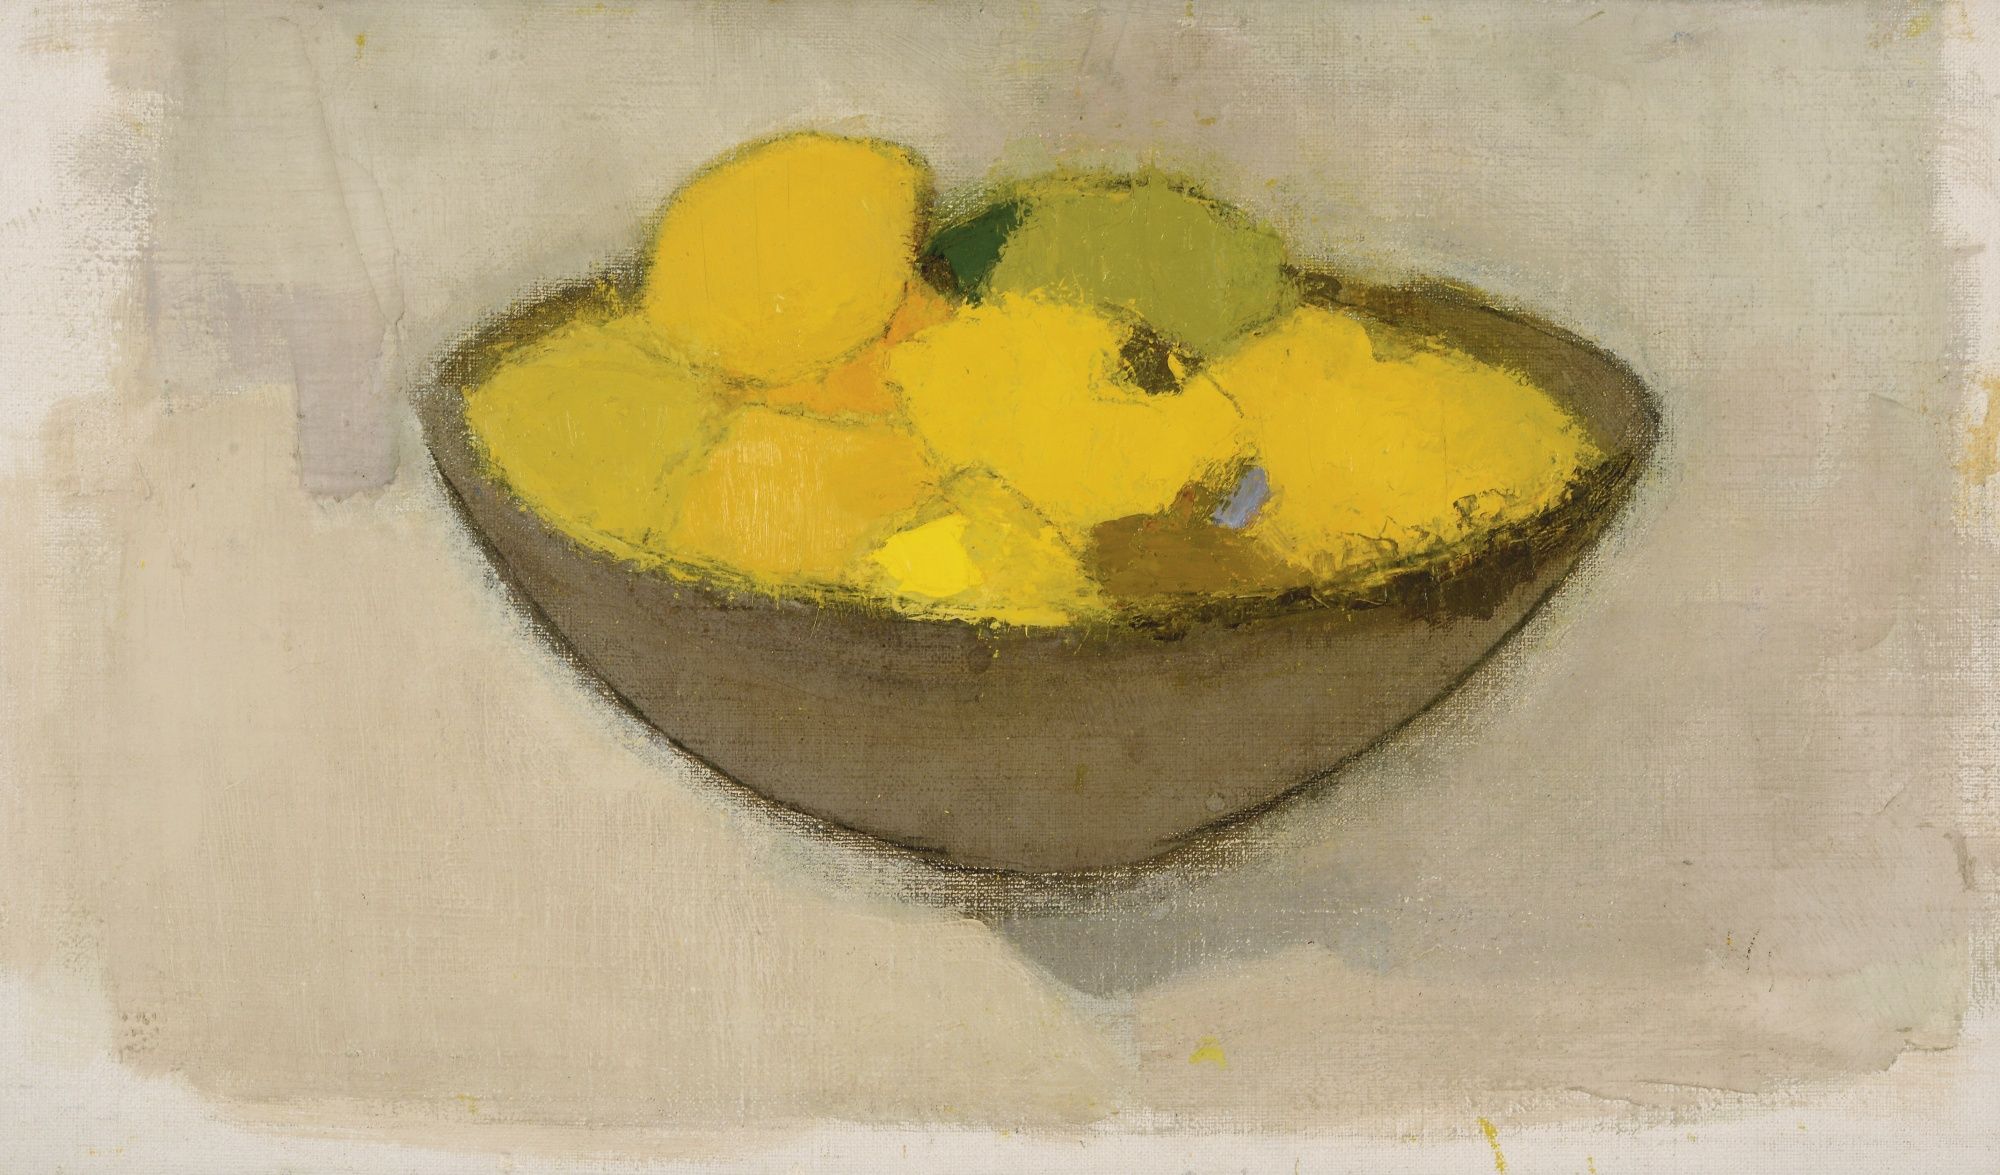 Lemons in the Bowl by Helene Schjerfbeck - 1934 - 34.5 x 59.5cm private collection